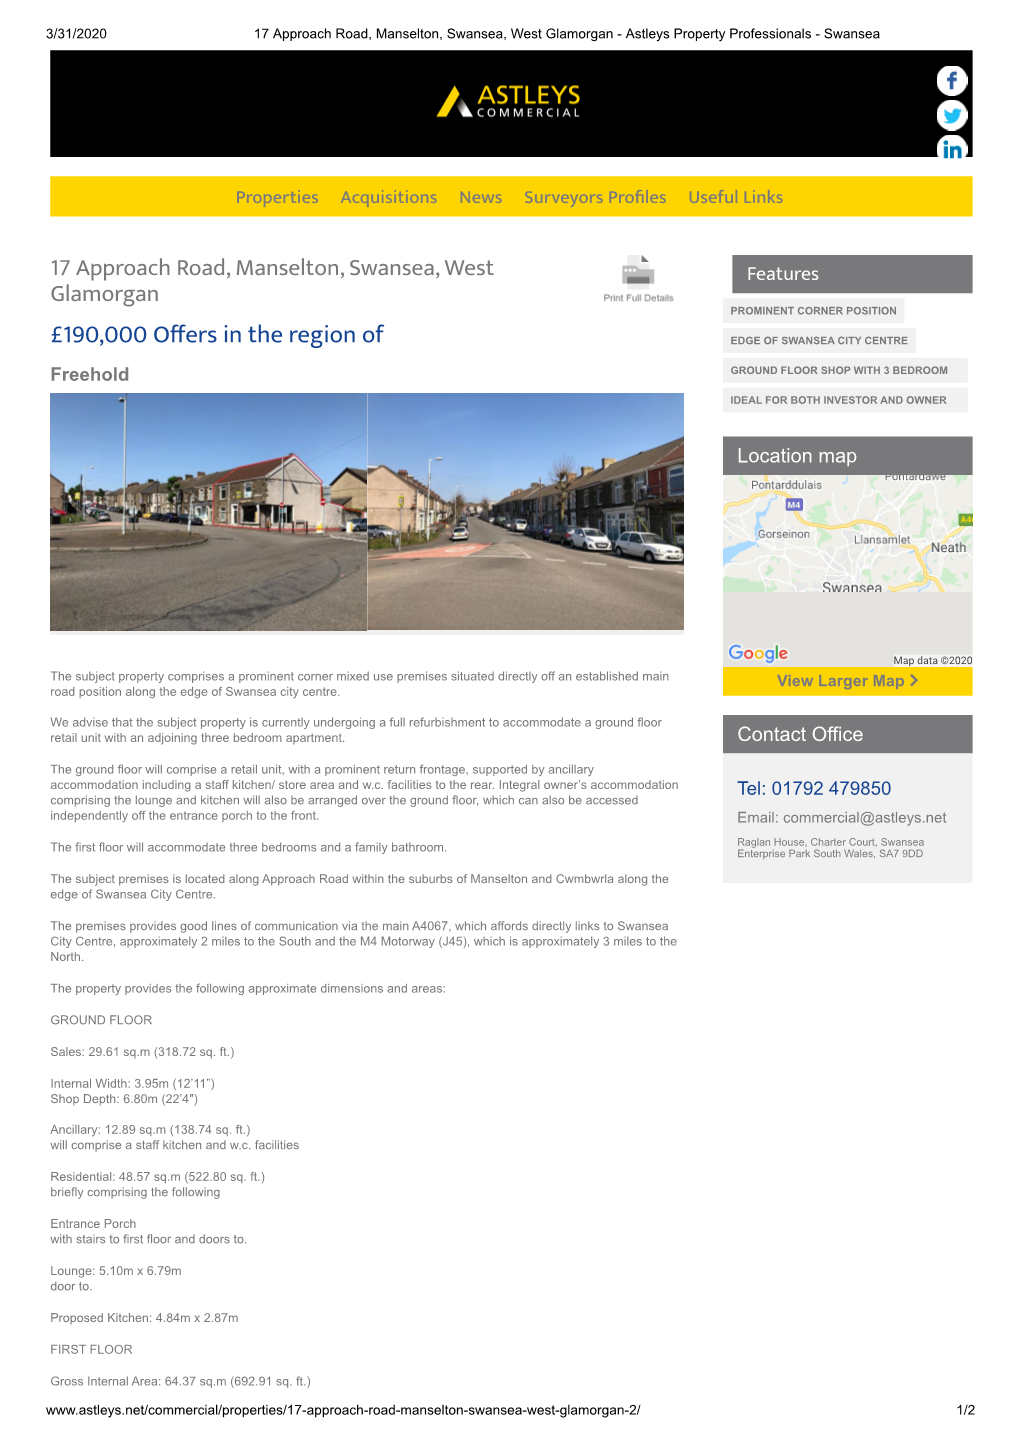 £190,000 O Ers in the Region Of